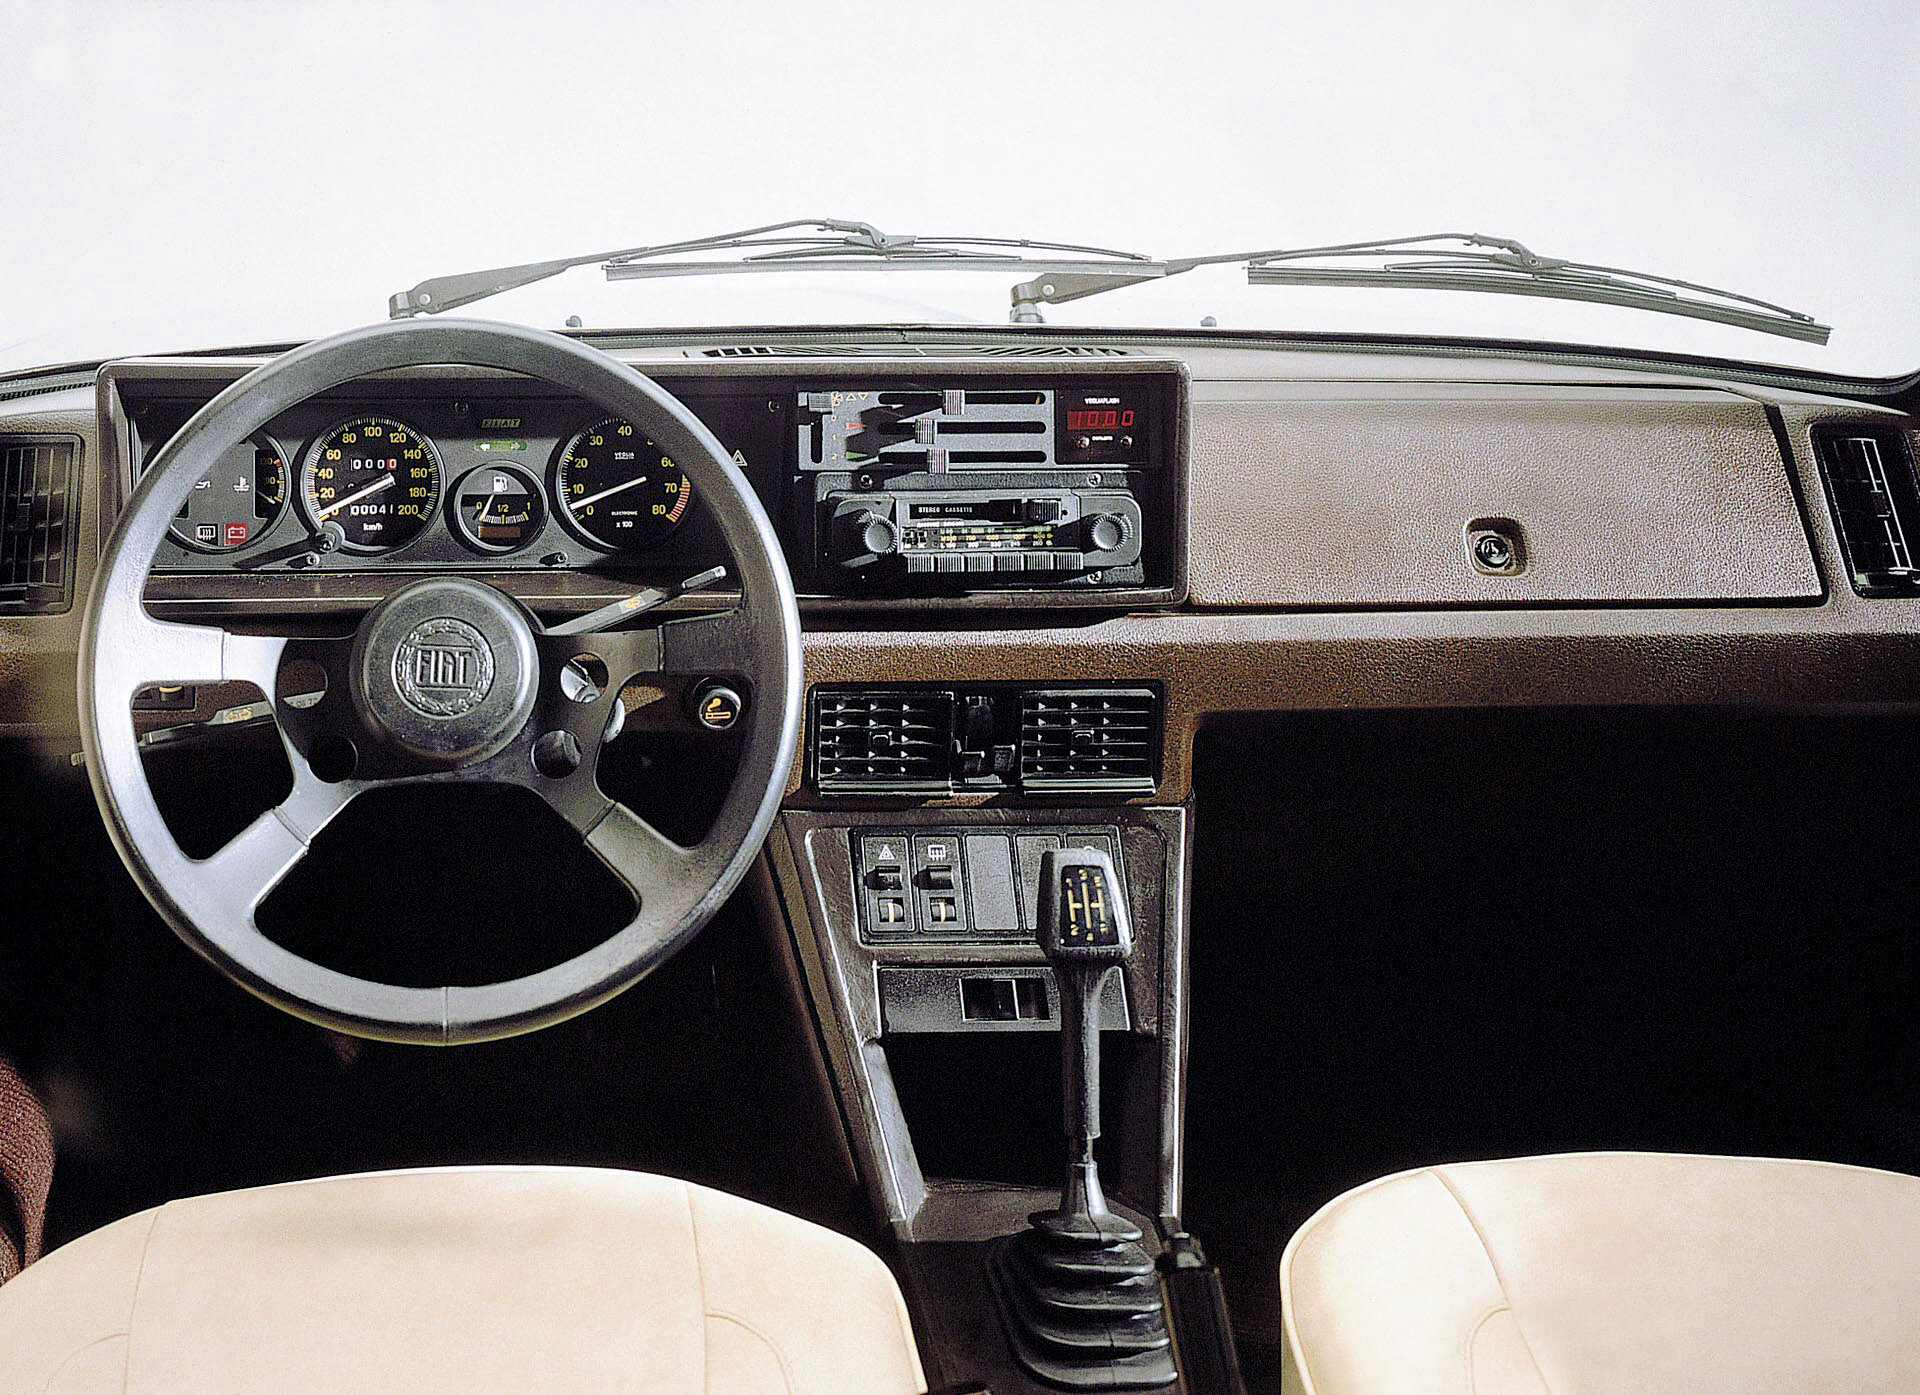 Fiat X1/9 interior has a touch of Italian flair